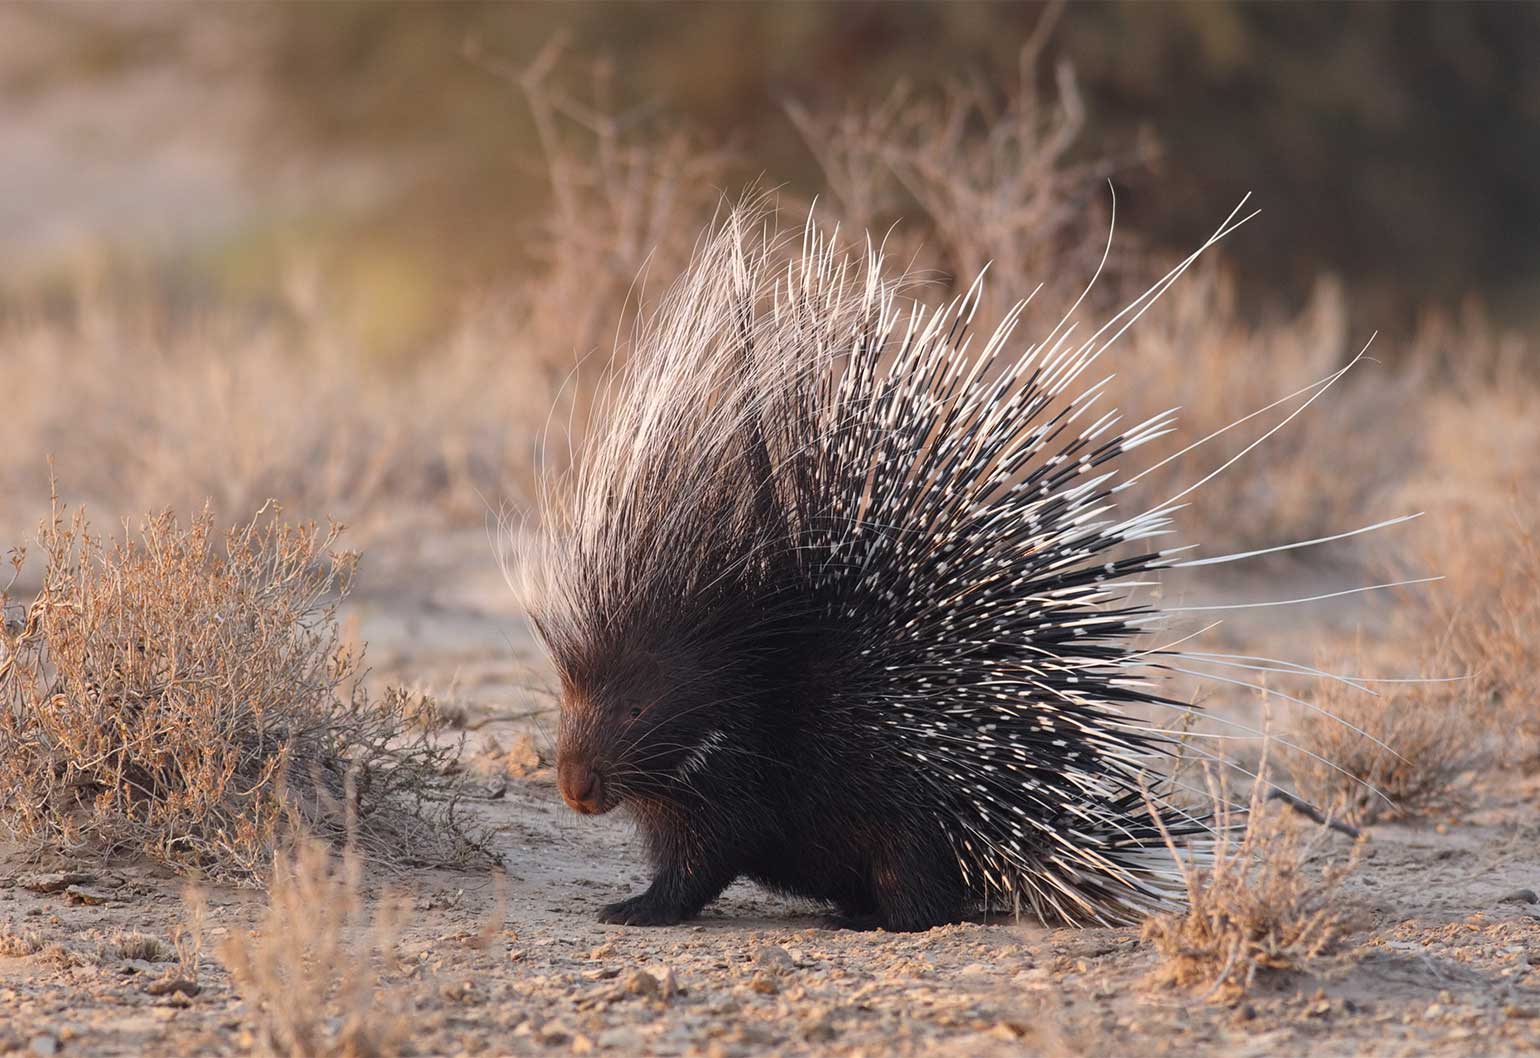 Porcupines, Or ‘cuddly Cactuses,’ Popping Up More In Central Texas